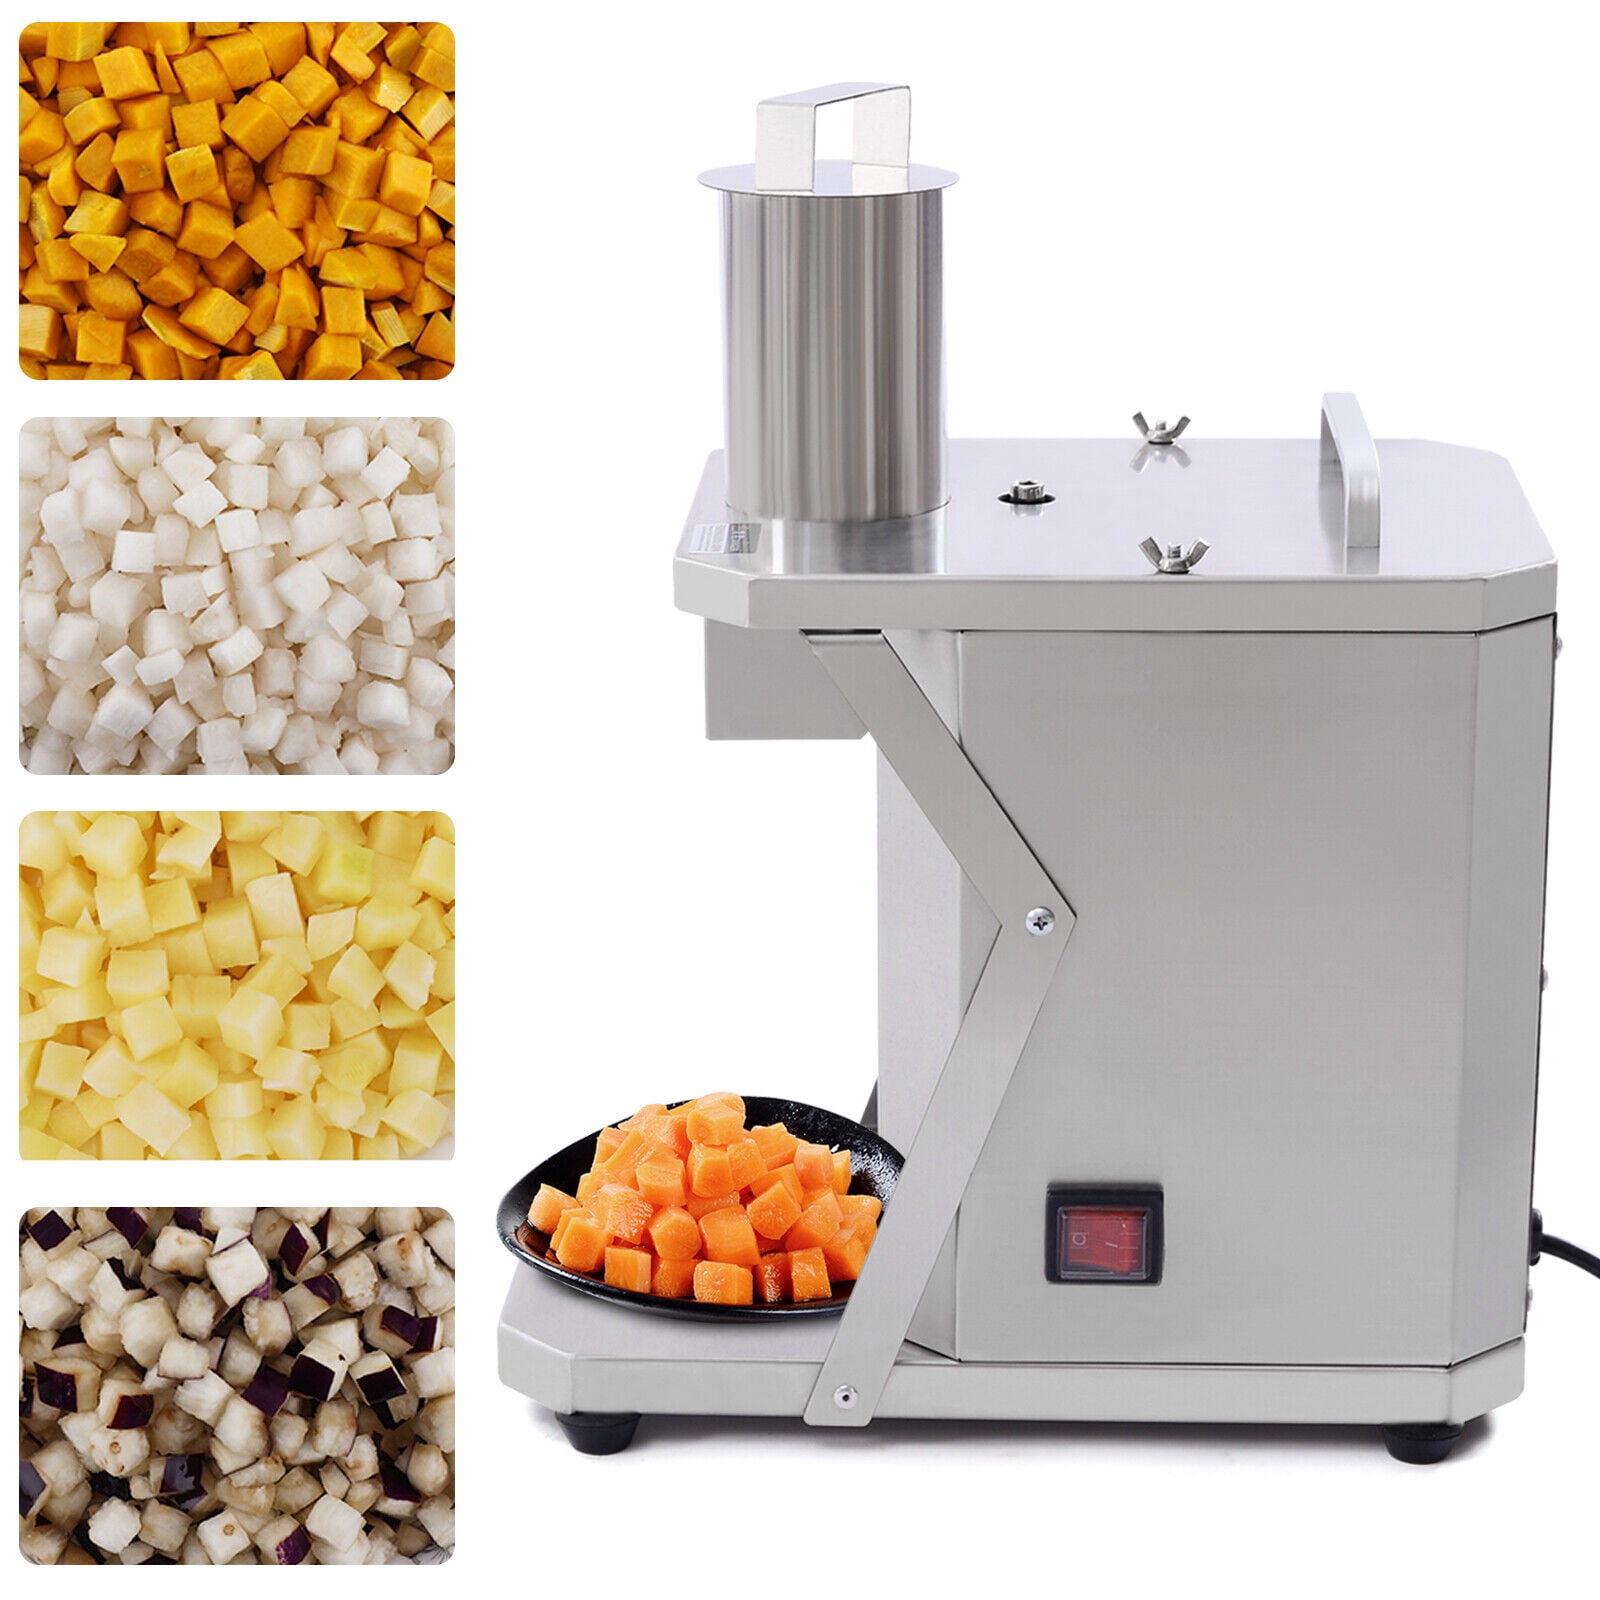 Dicing Machines｜Semiconductor Manufacturing Equipment